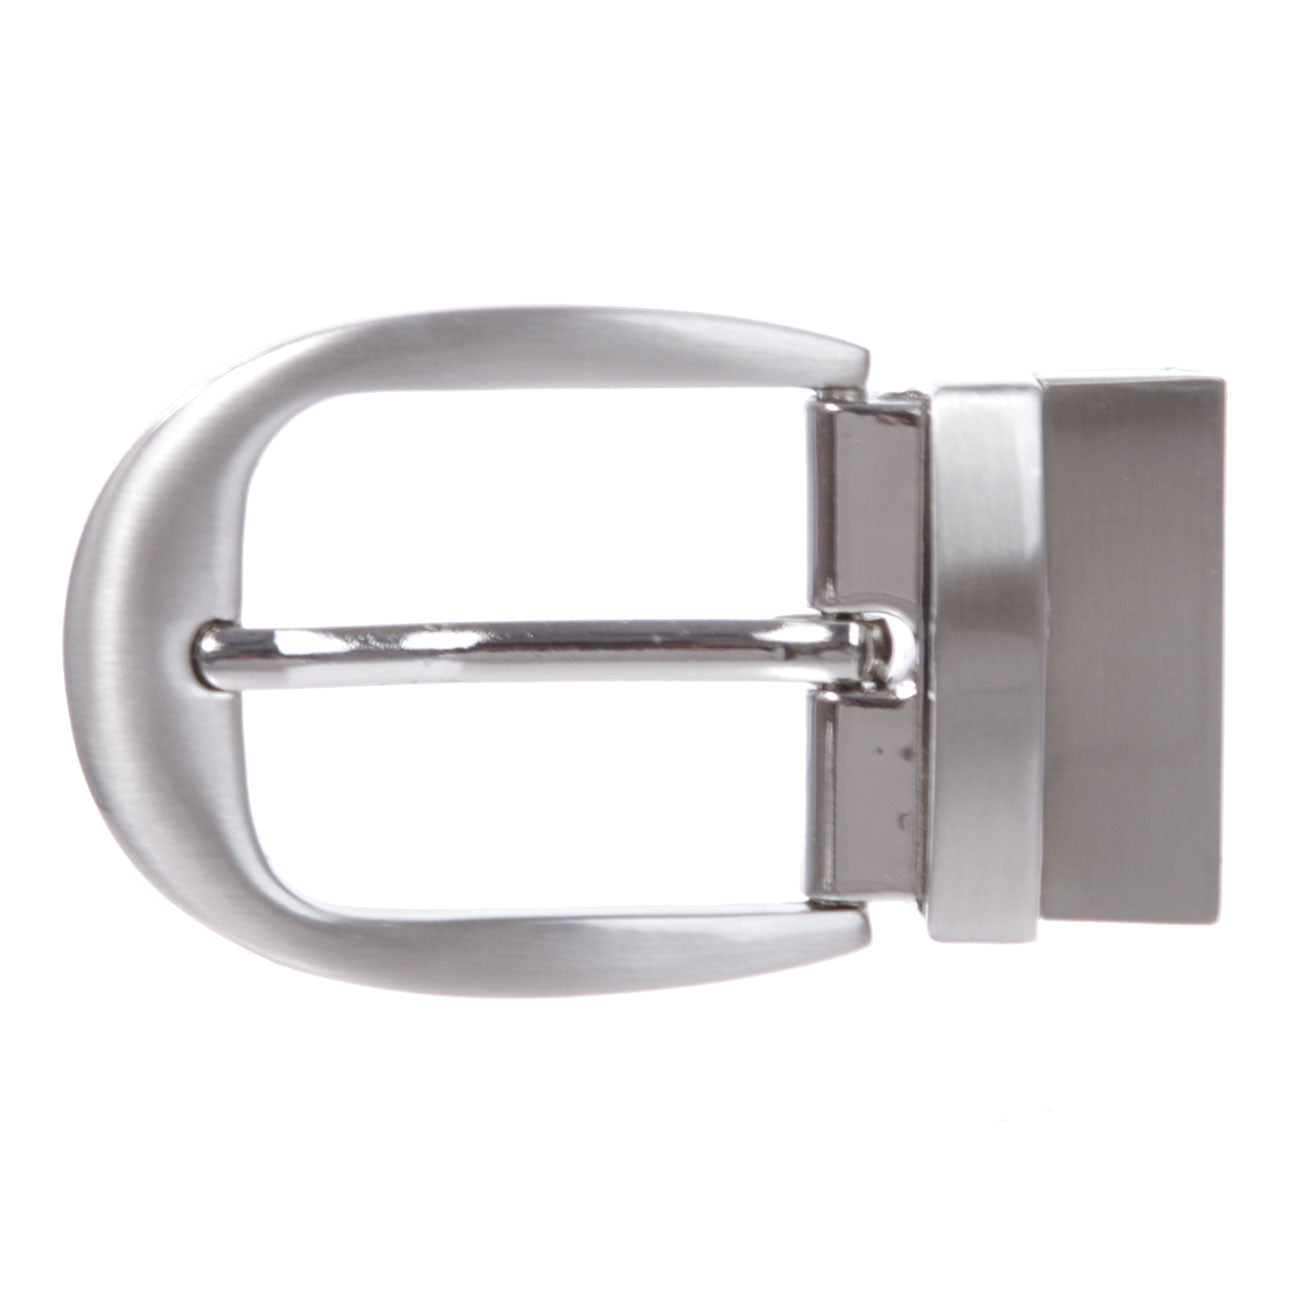 1 3/8" (34 mm) Nickel Free Round Twisted Clamp Belt Buckle